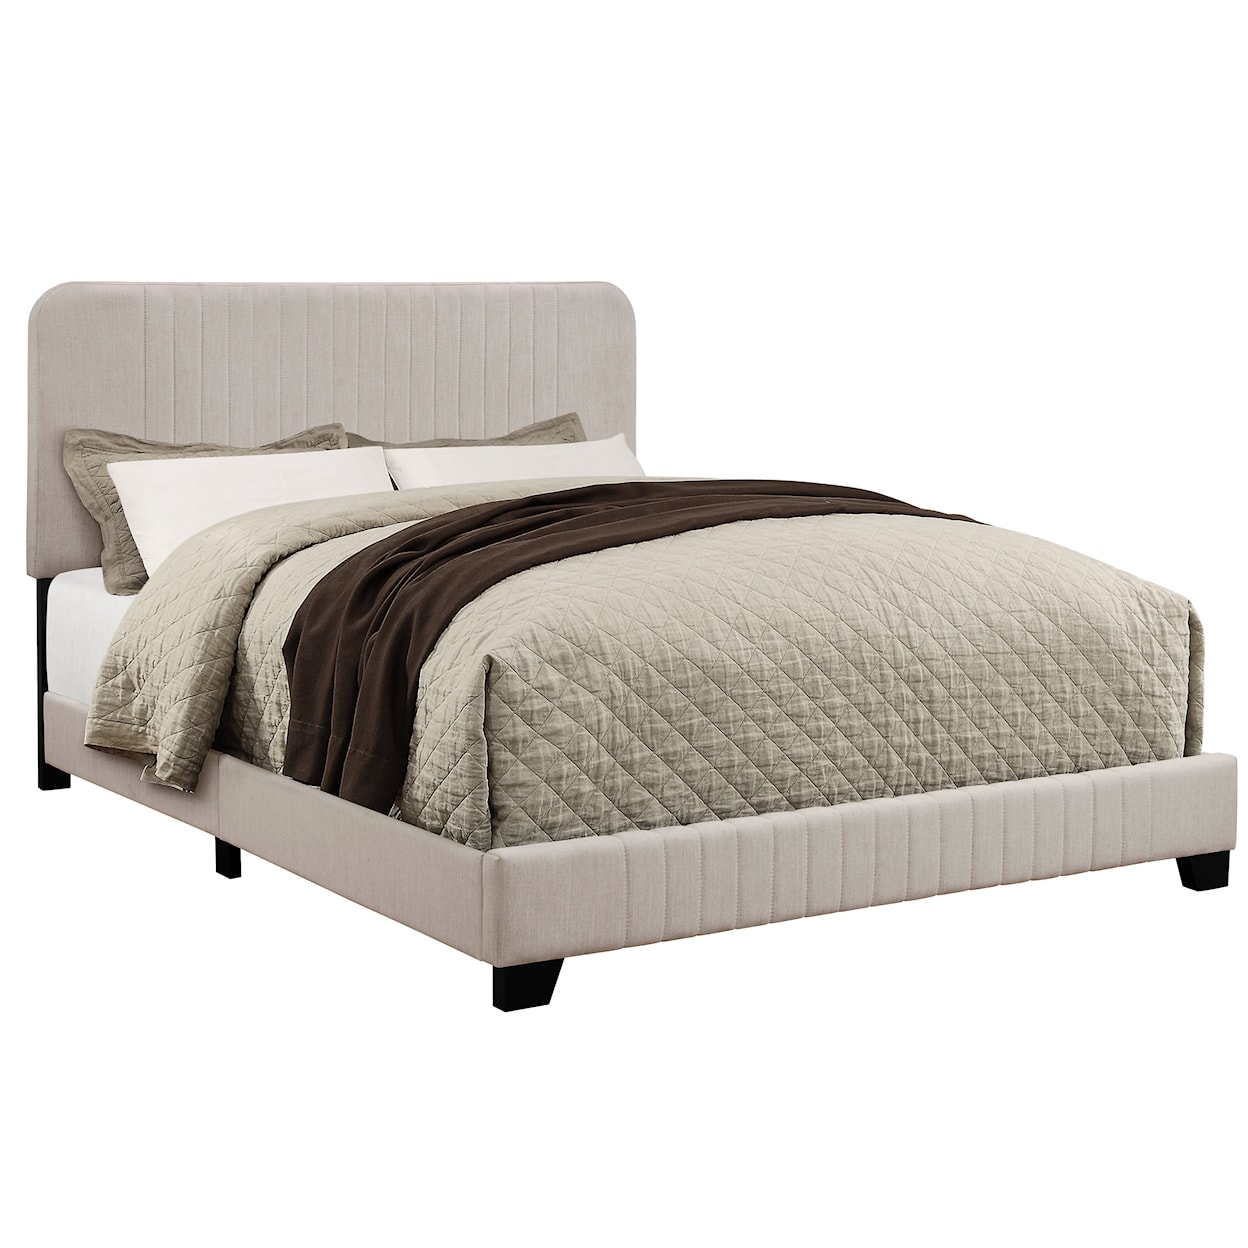 Accentrics Home Fashion Beds King Upholstered Bed